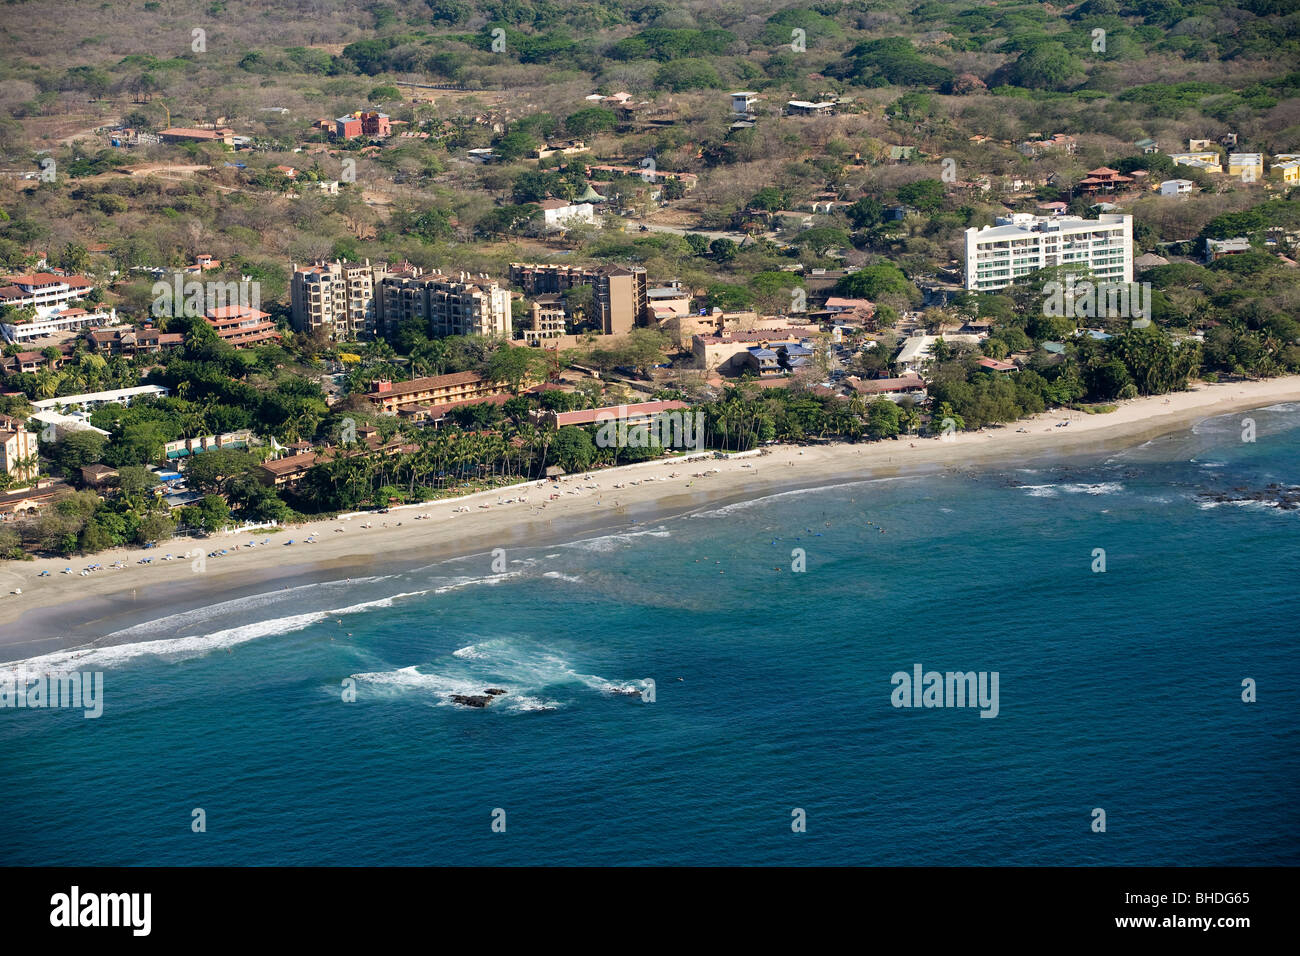 An aerial view of the beachfront of Tamarindo in Guanacaste, Costa Rica